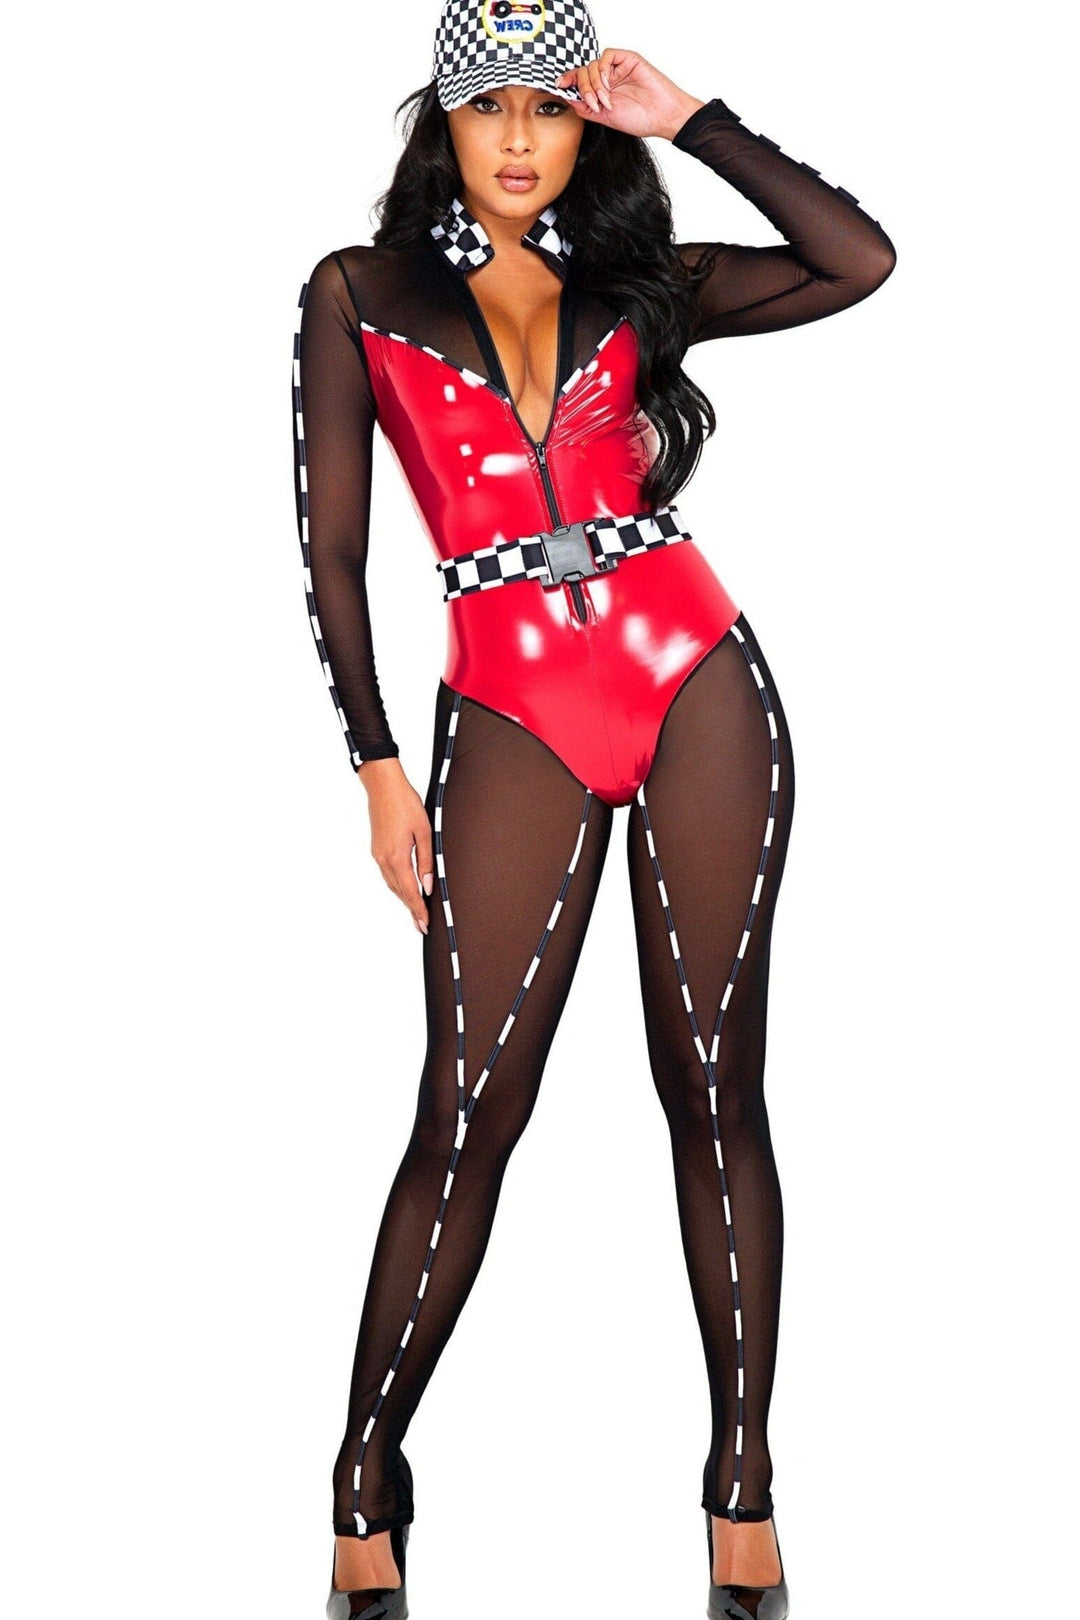 Speedway Hottie Costume-Racer Costumes-Roma Costumes-SEXYSHOES.COM